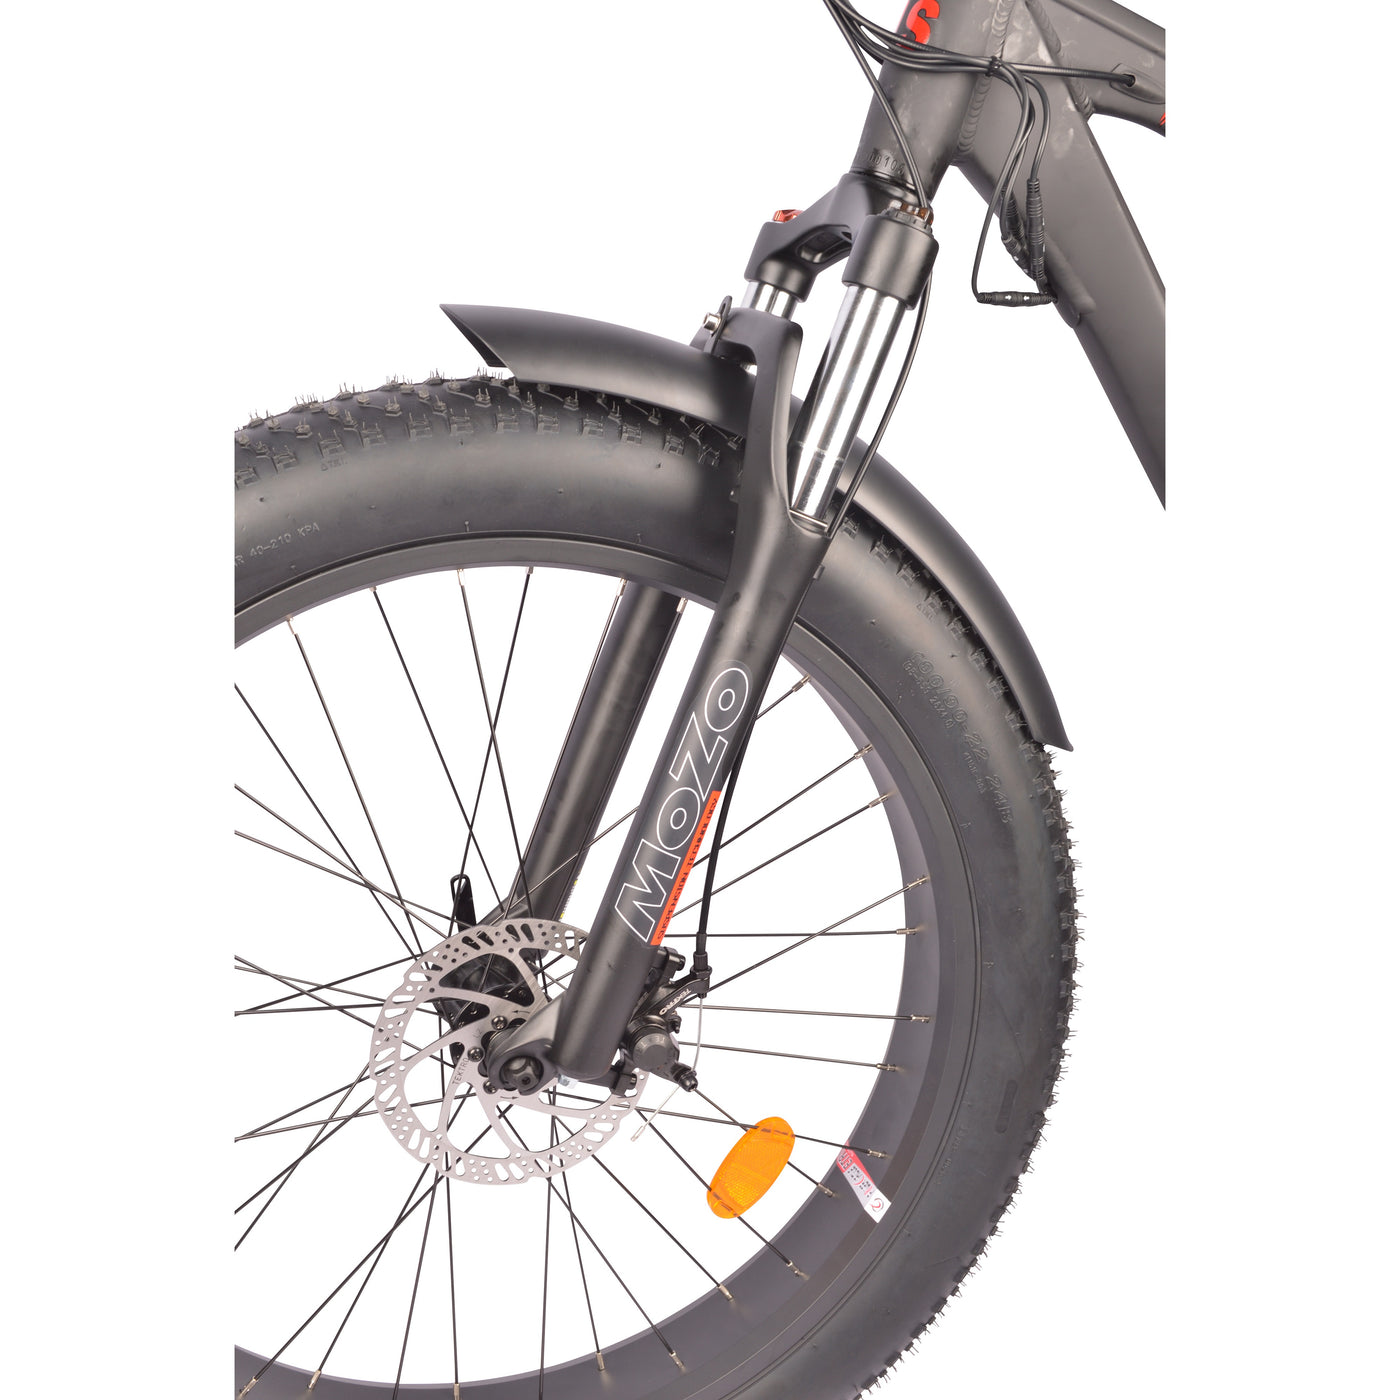 DJ Bikes mid drive ebike equipped with 26” fat tires & lockout preload adjustment suspension fork